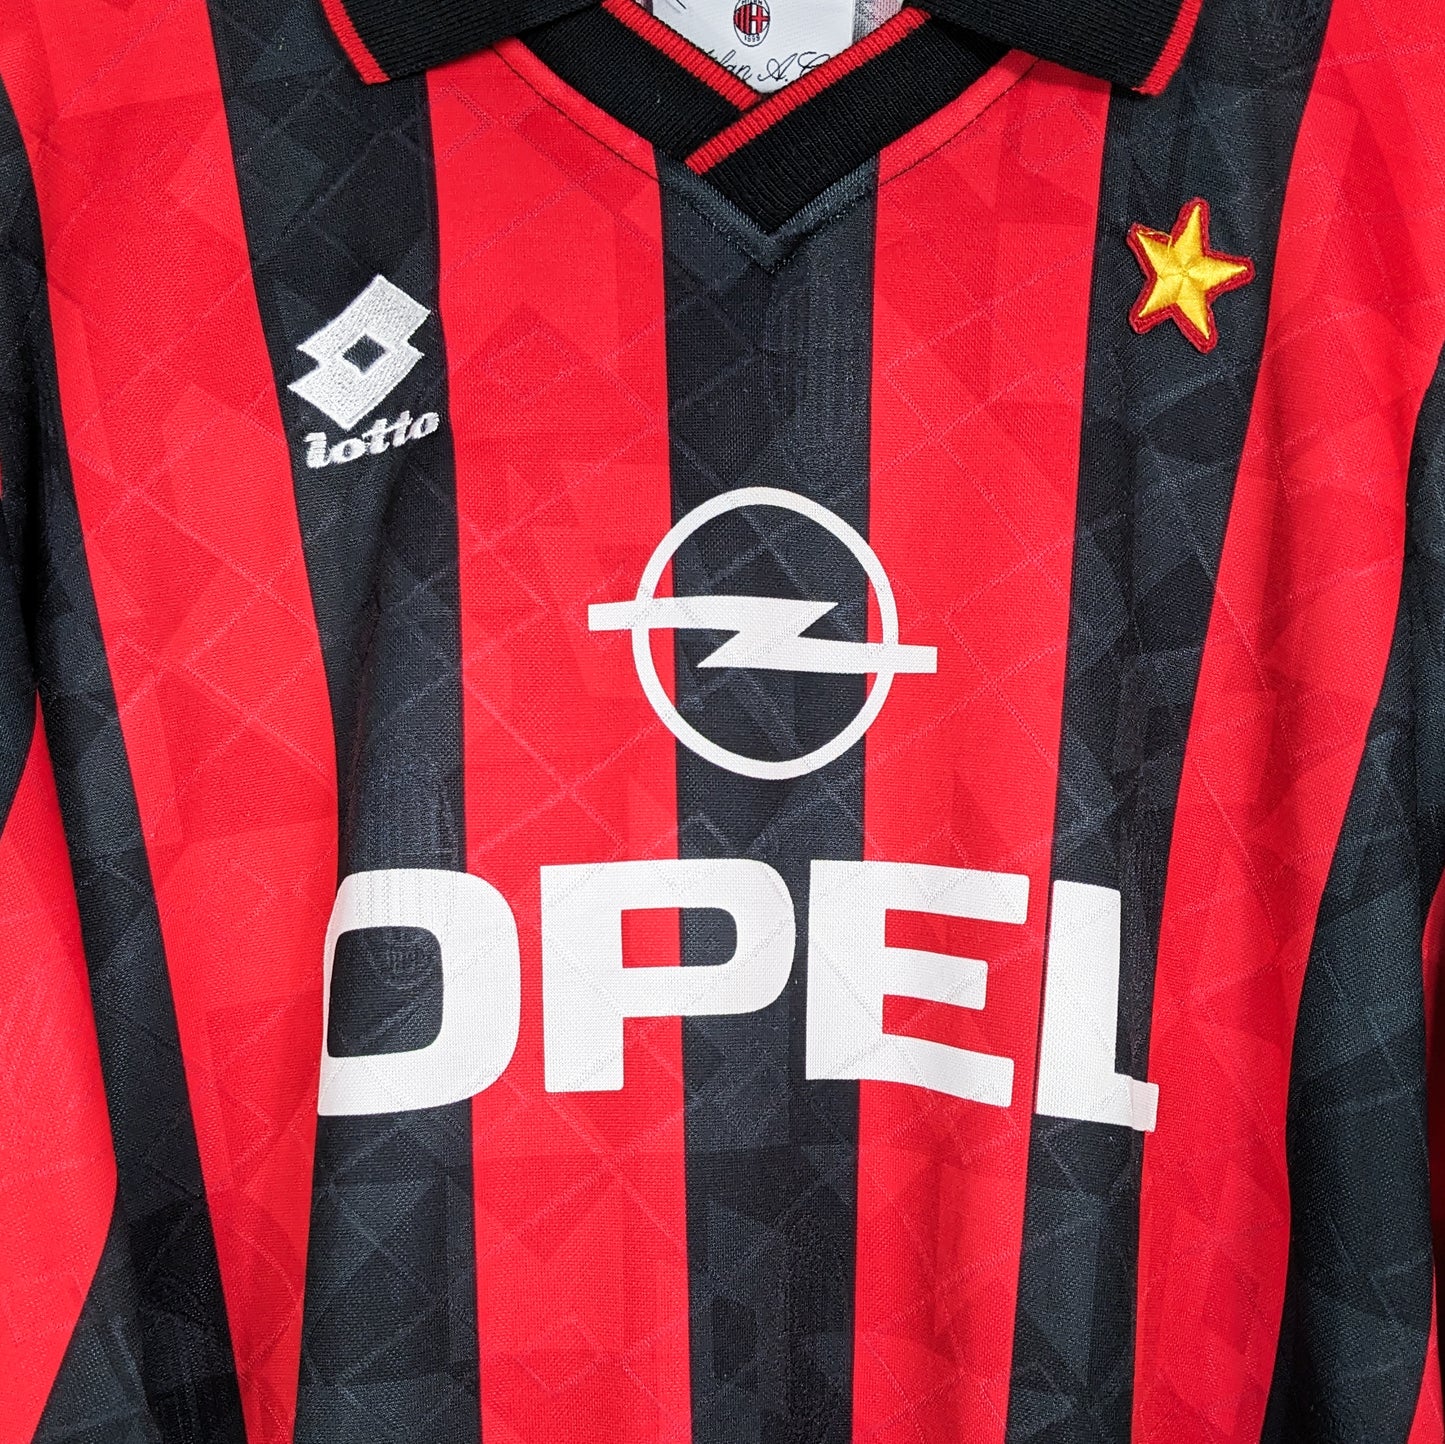 Authentic AC Milan 1994/1995 Home - Maldini #3 Size XXL (Long Sleeve) (Player Issue)